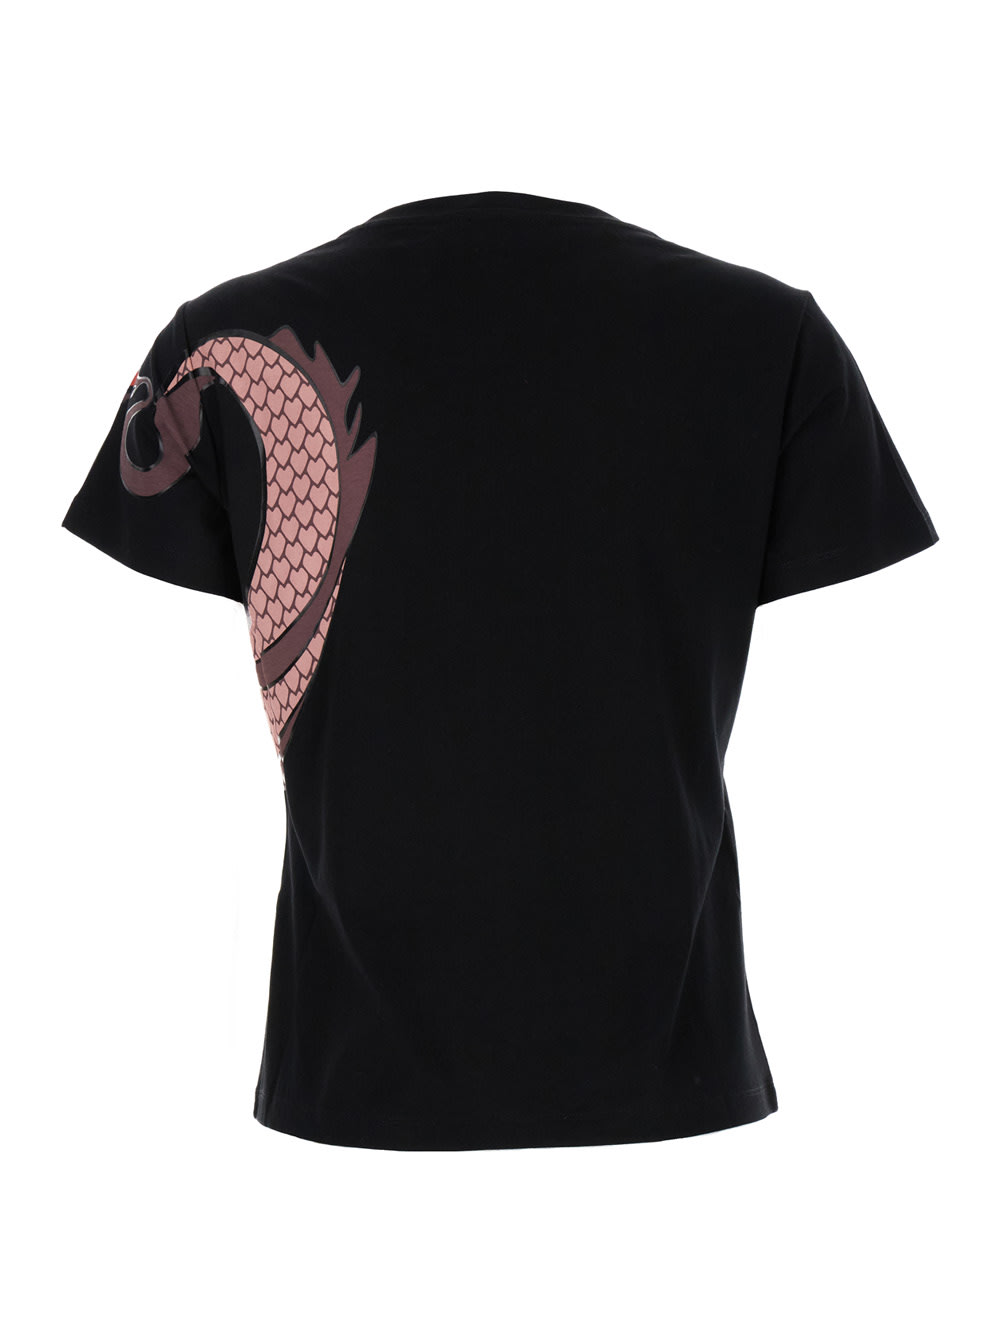 PINKO QUENTIN BLACK T-SHIRT WITH DRAGON PRINT IN COTTON WOMAN